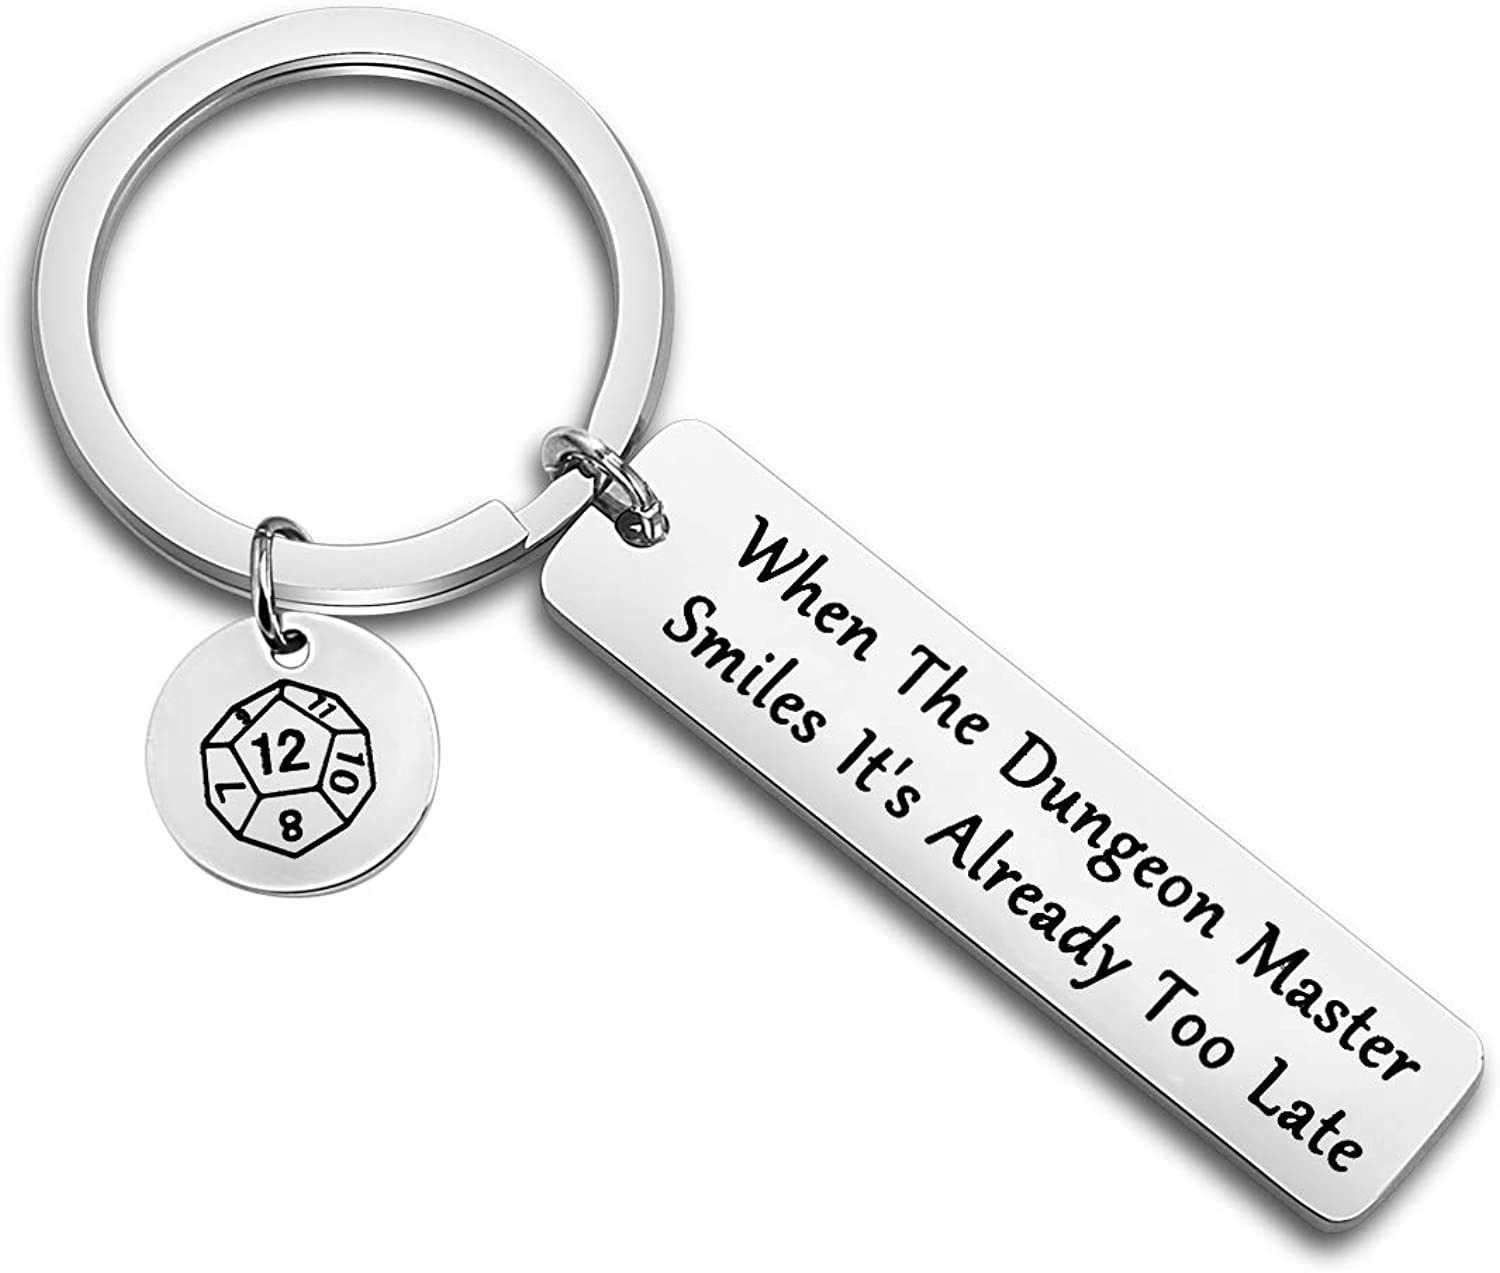 When The Dungeon Master Smiles It's Already Too Late Keychain Dungeon Master Gift Funny Dungeons and Dragons Gifts - image 1 of 5